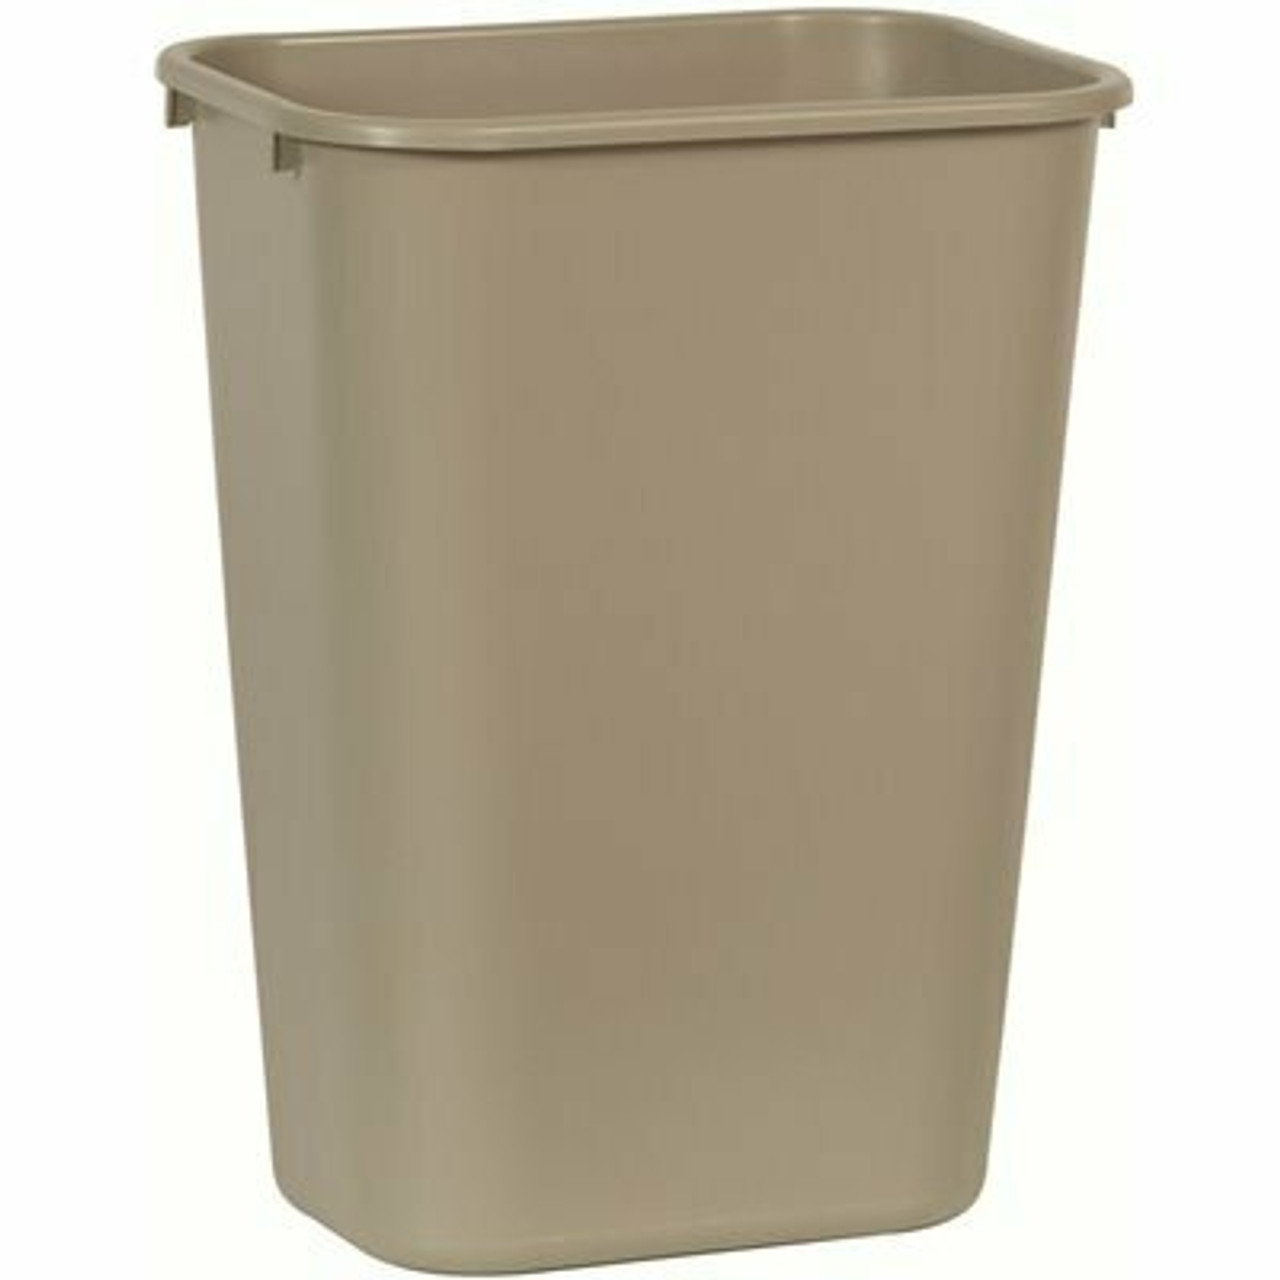 Rubbermaid Commercial Products 10.25 Gal. Beige Rectangular Trash Can